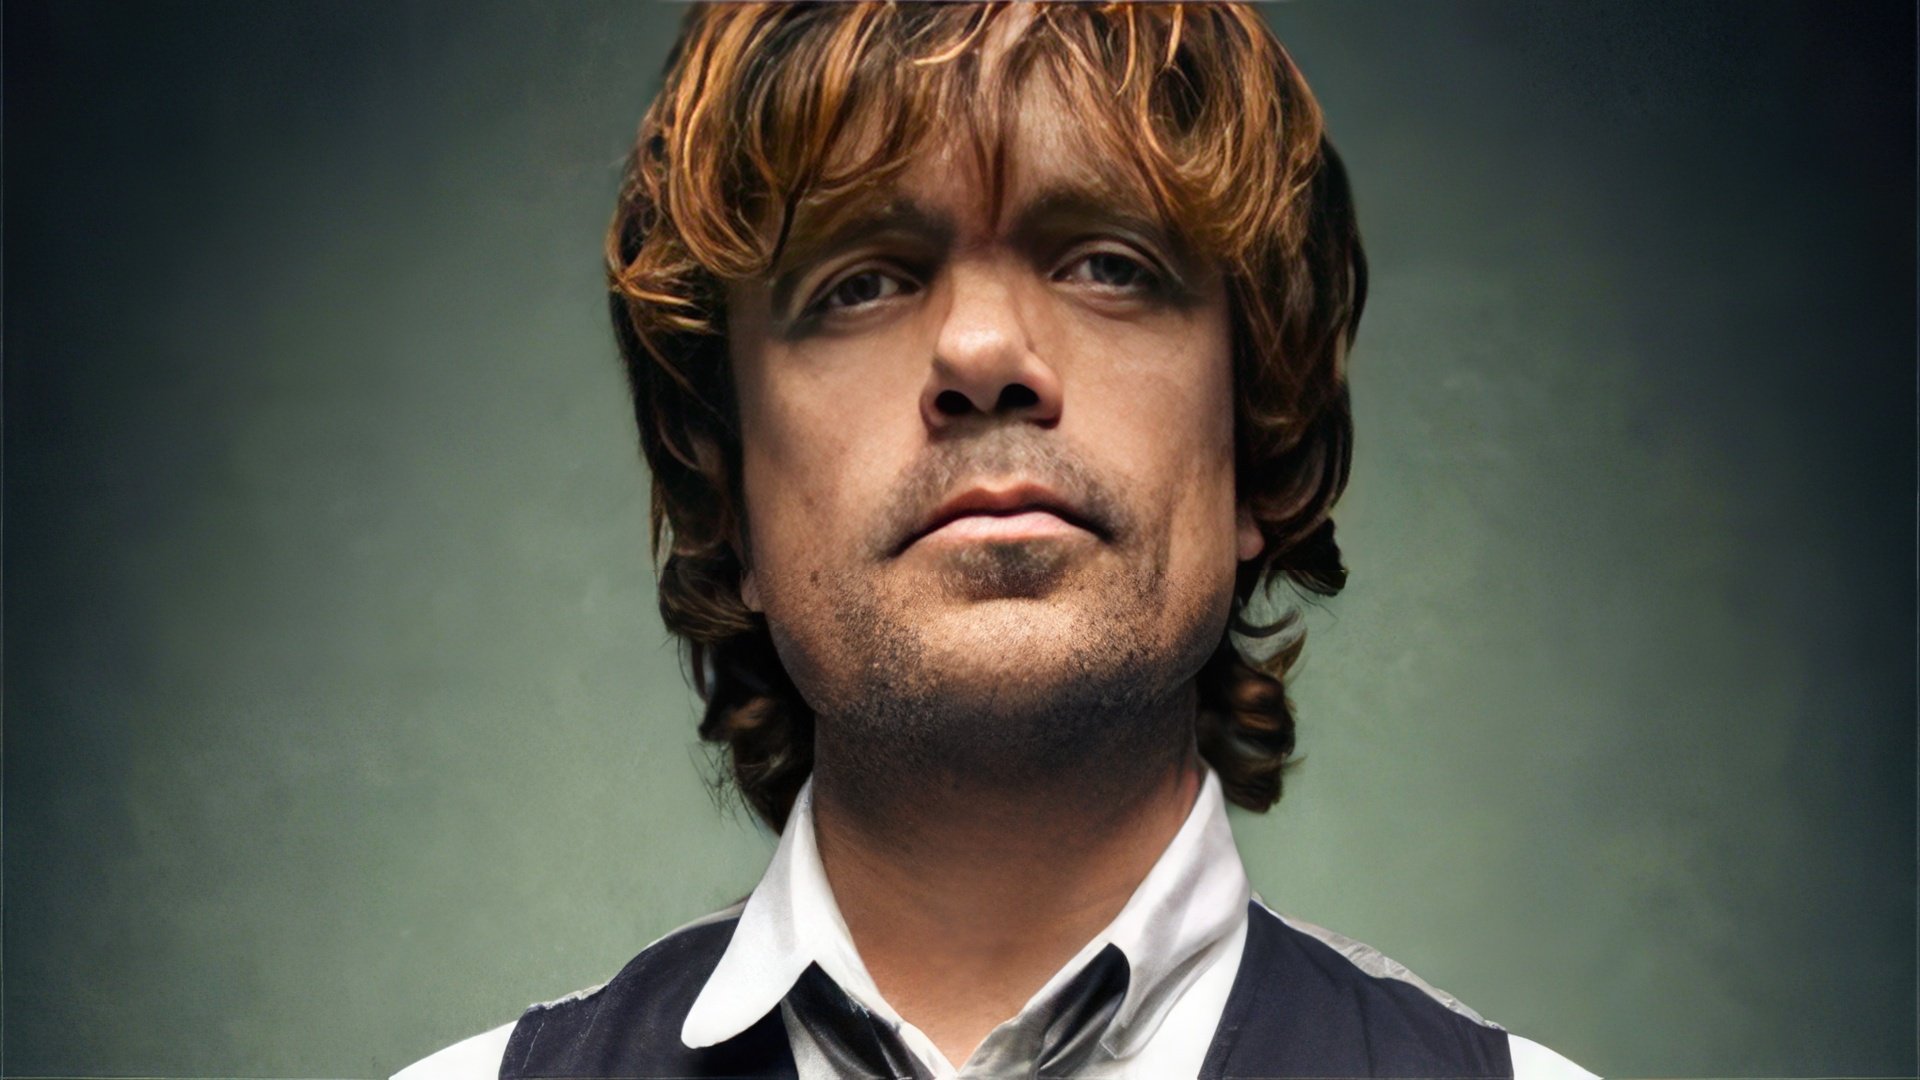 His height did was no obstacle in Peter Dinklage’s path to success